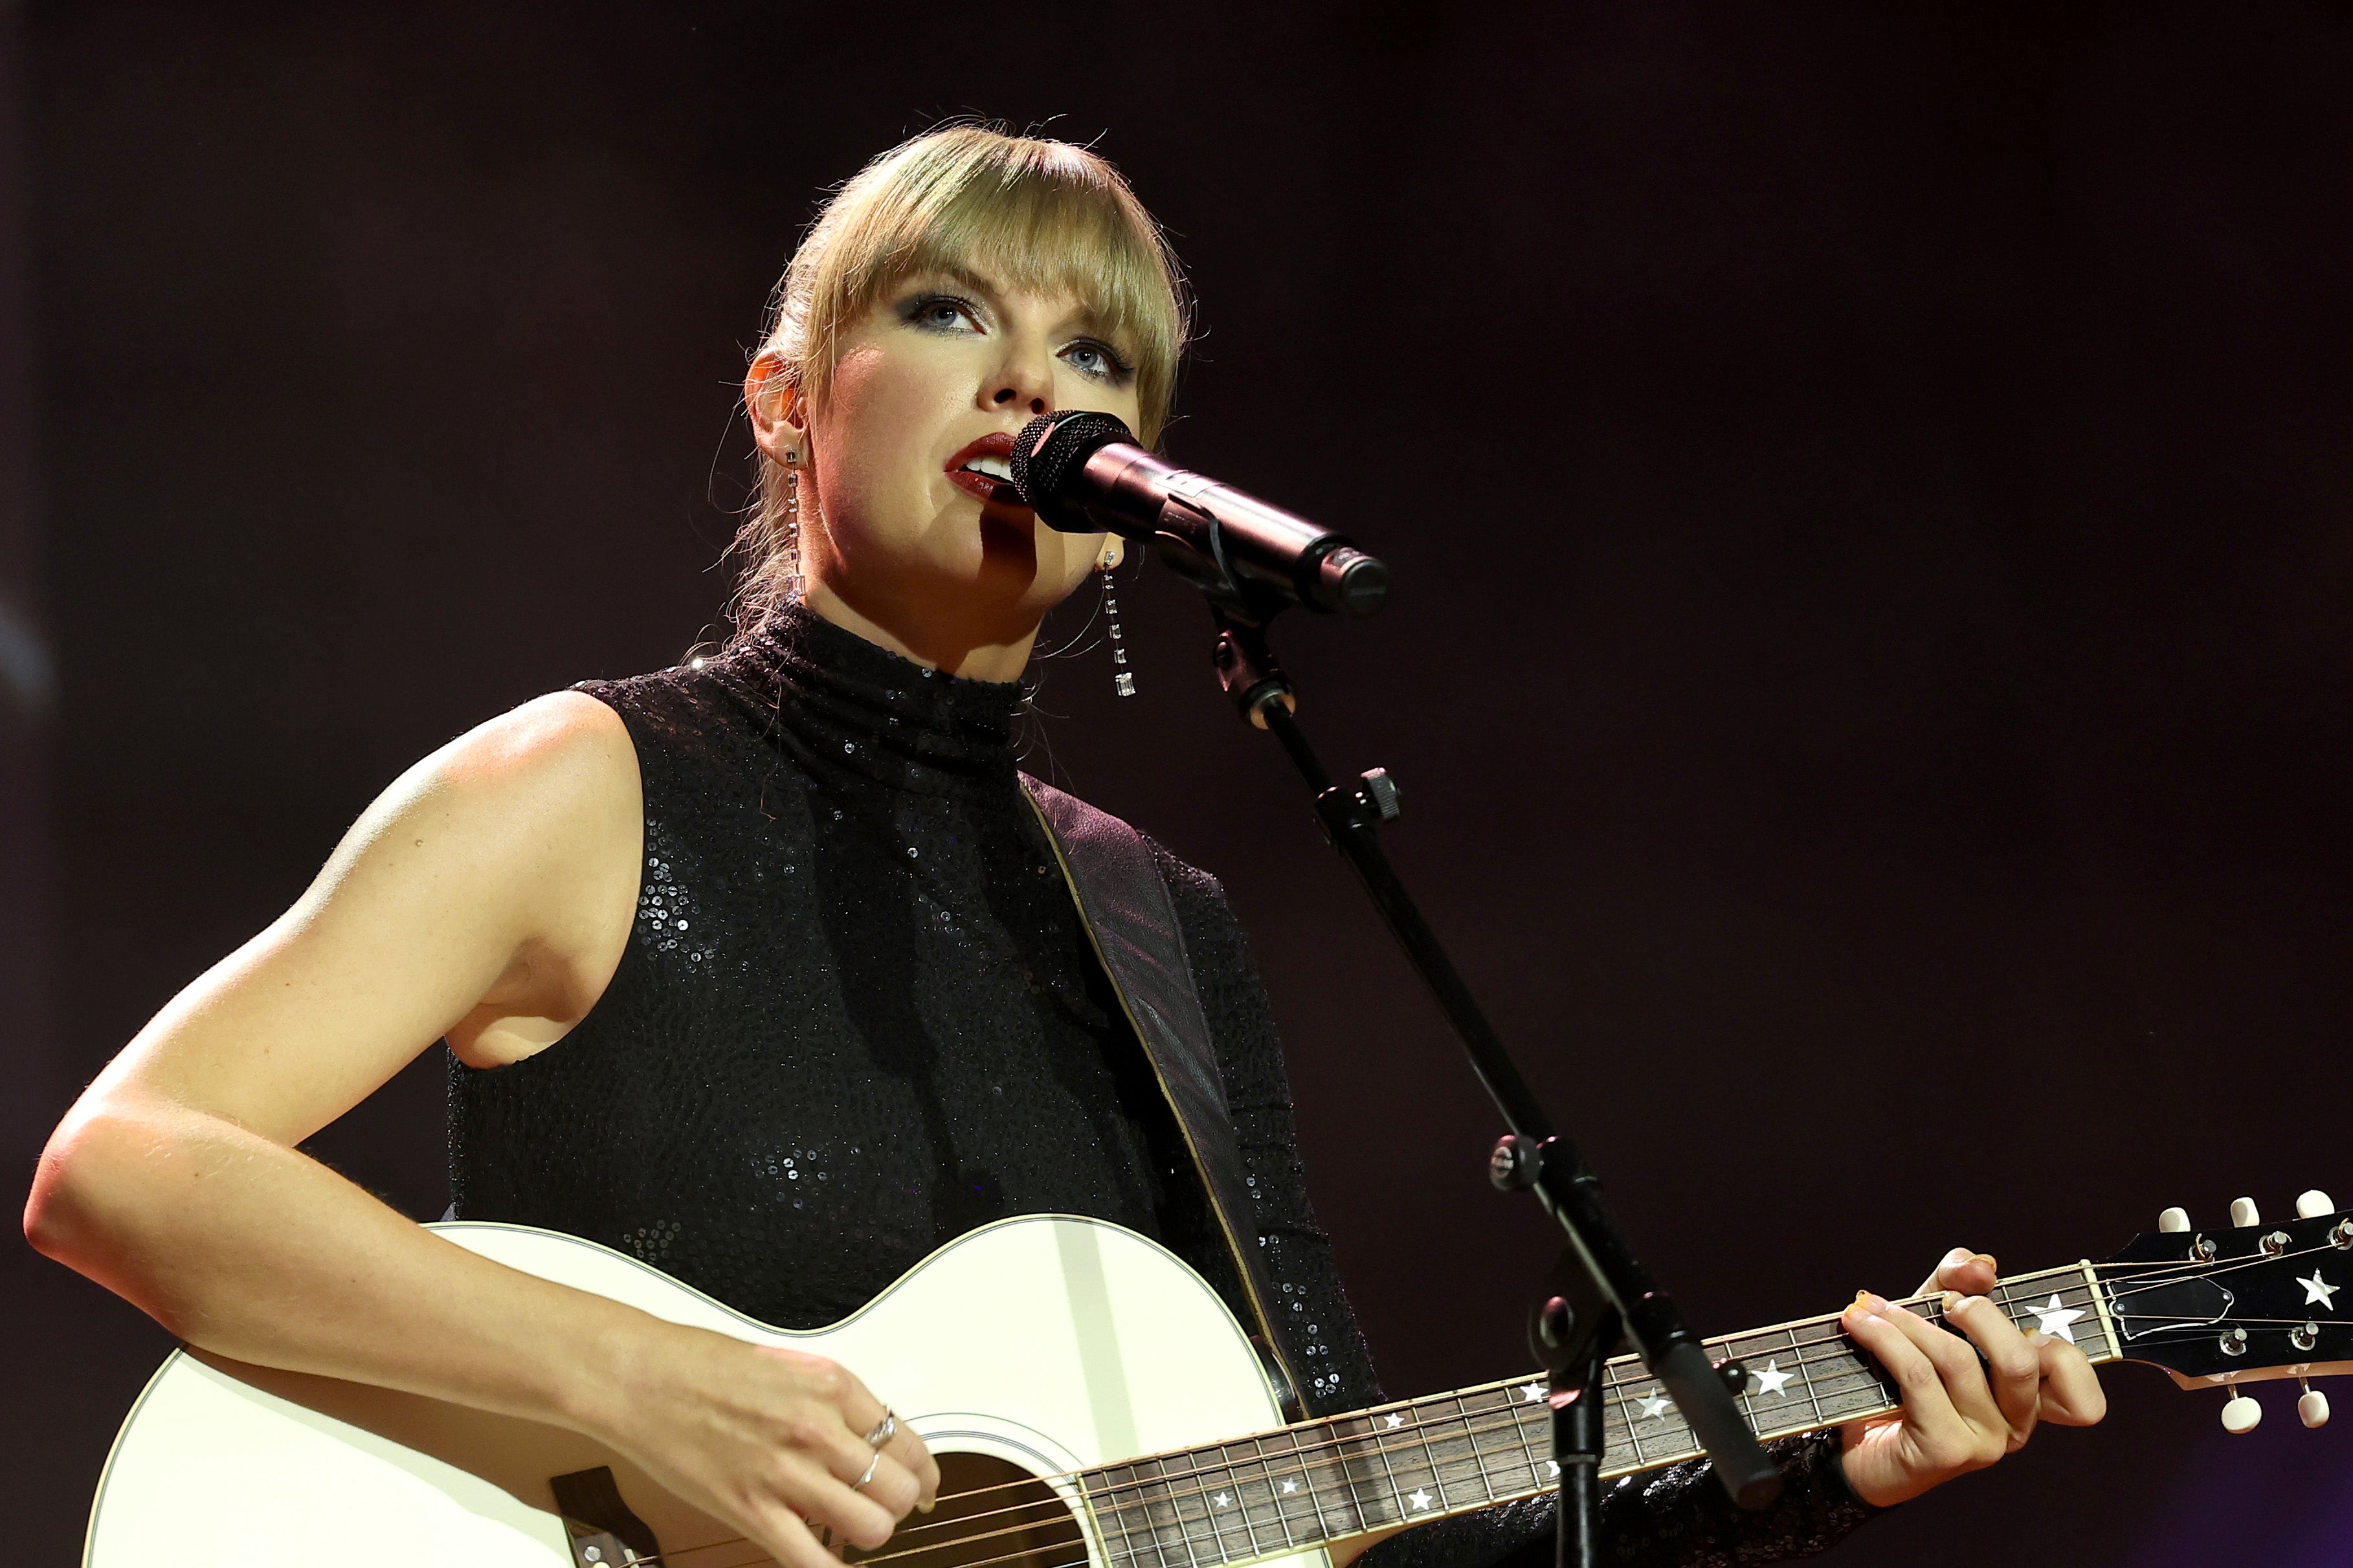 Taylor Swift has written songs about several of her exes